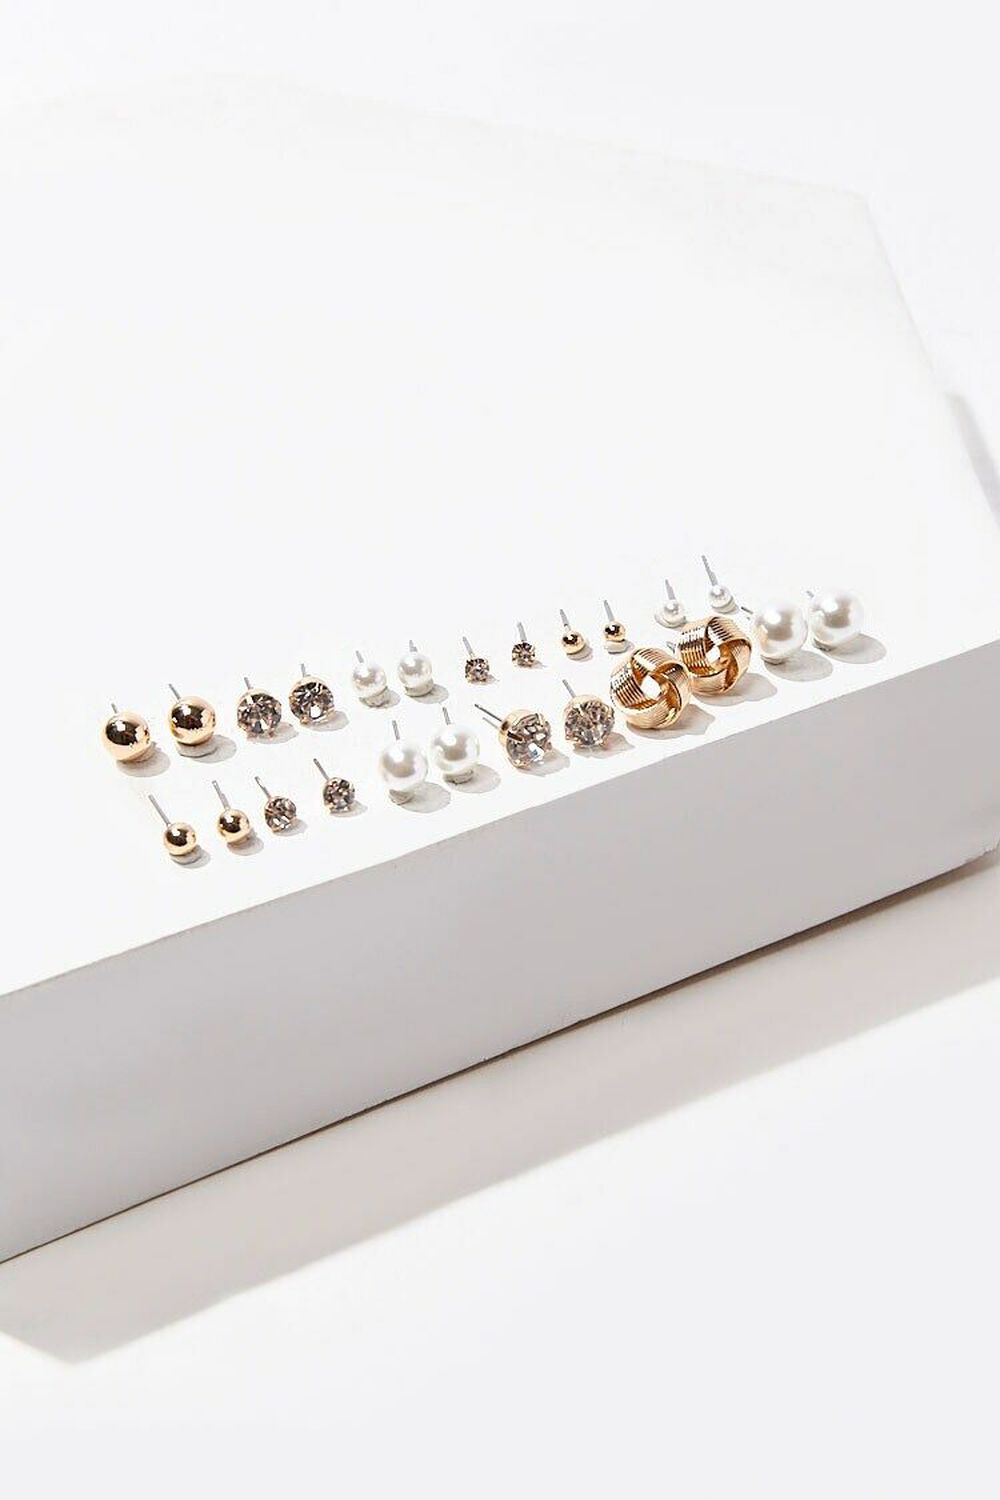 GOLD/CLEAR Faux Pearl Stud Earring Set, image 1